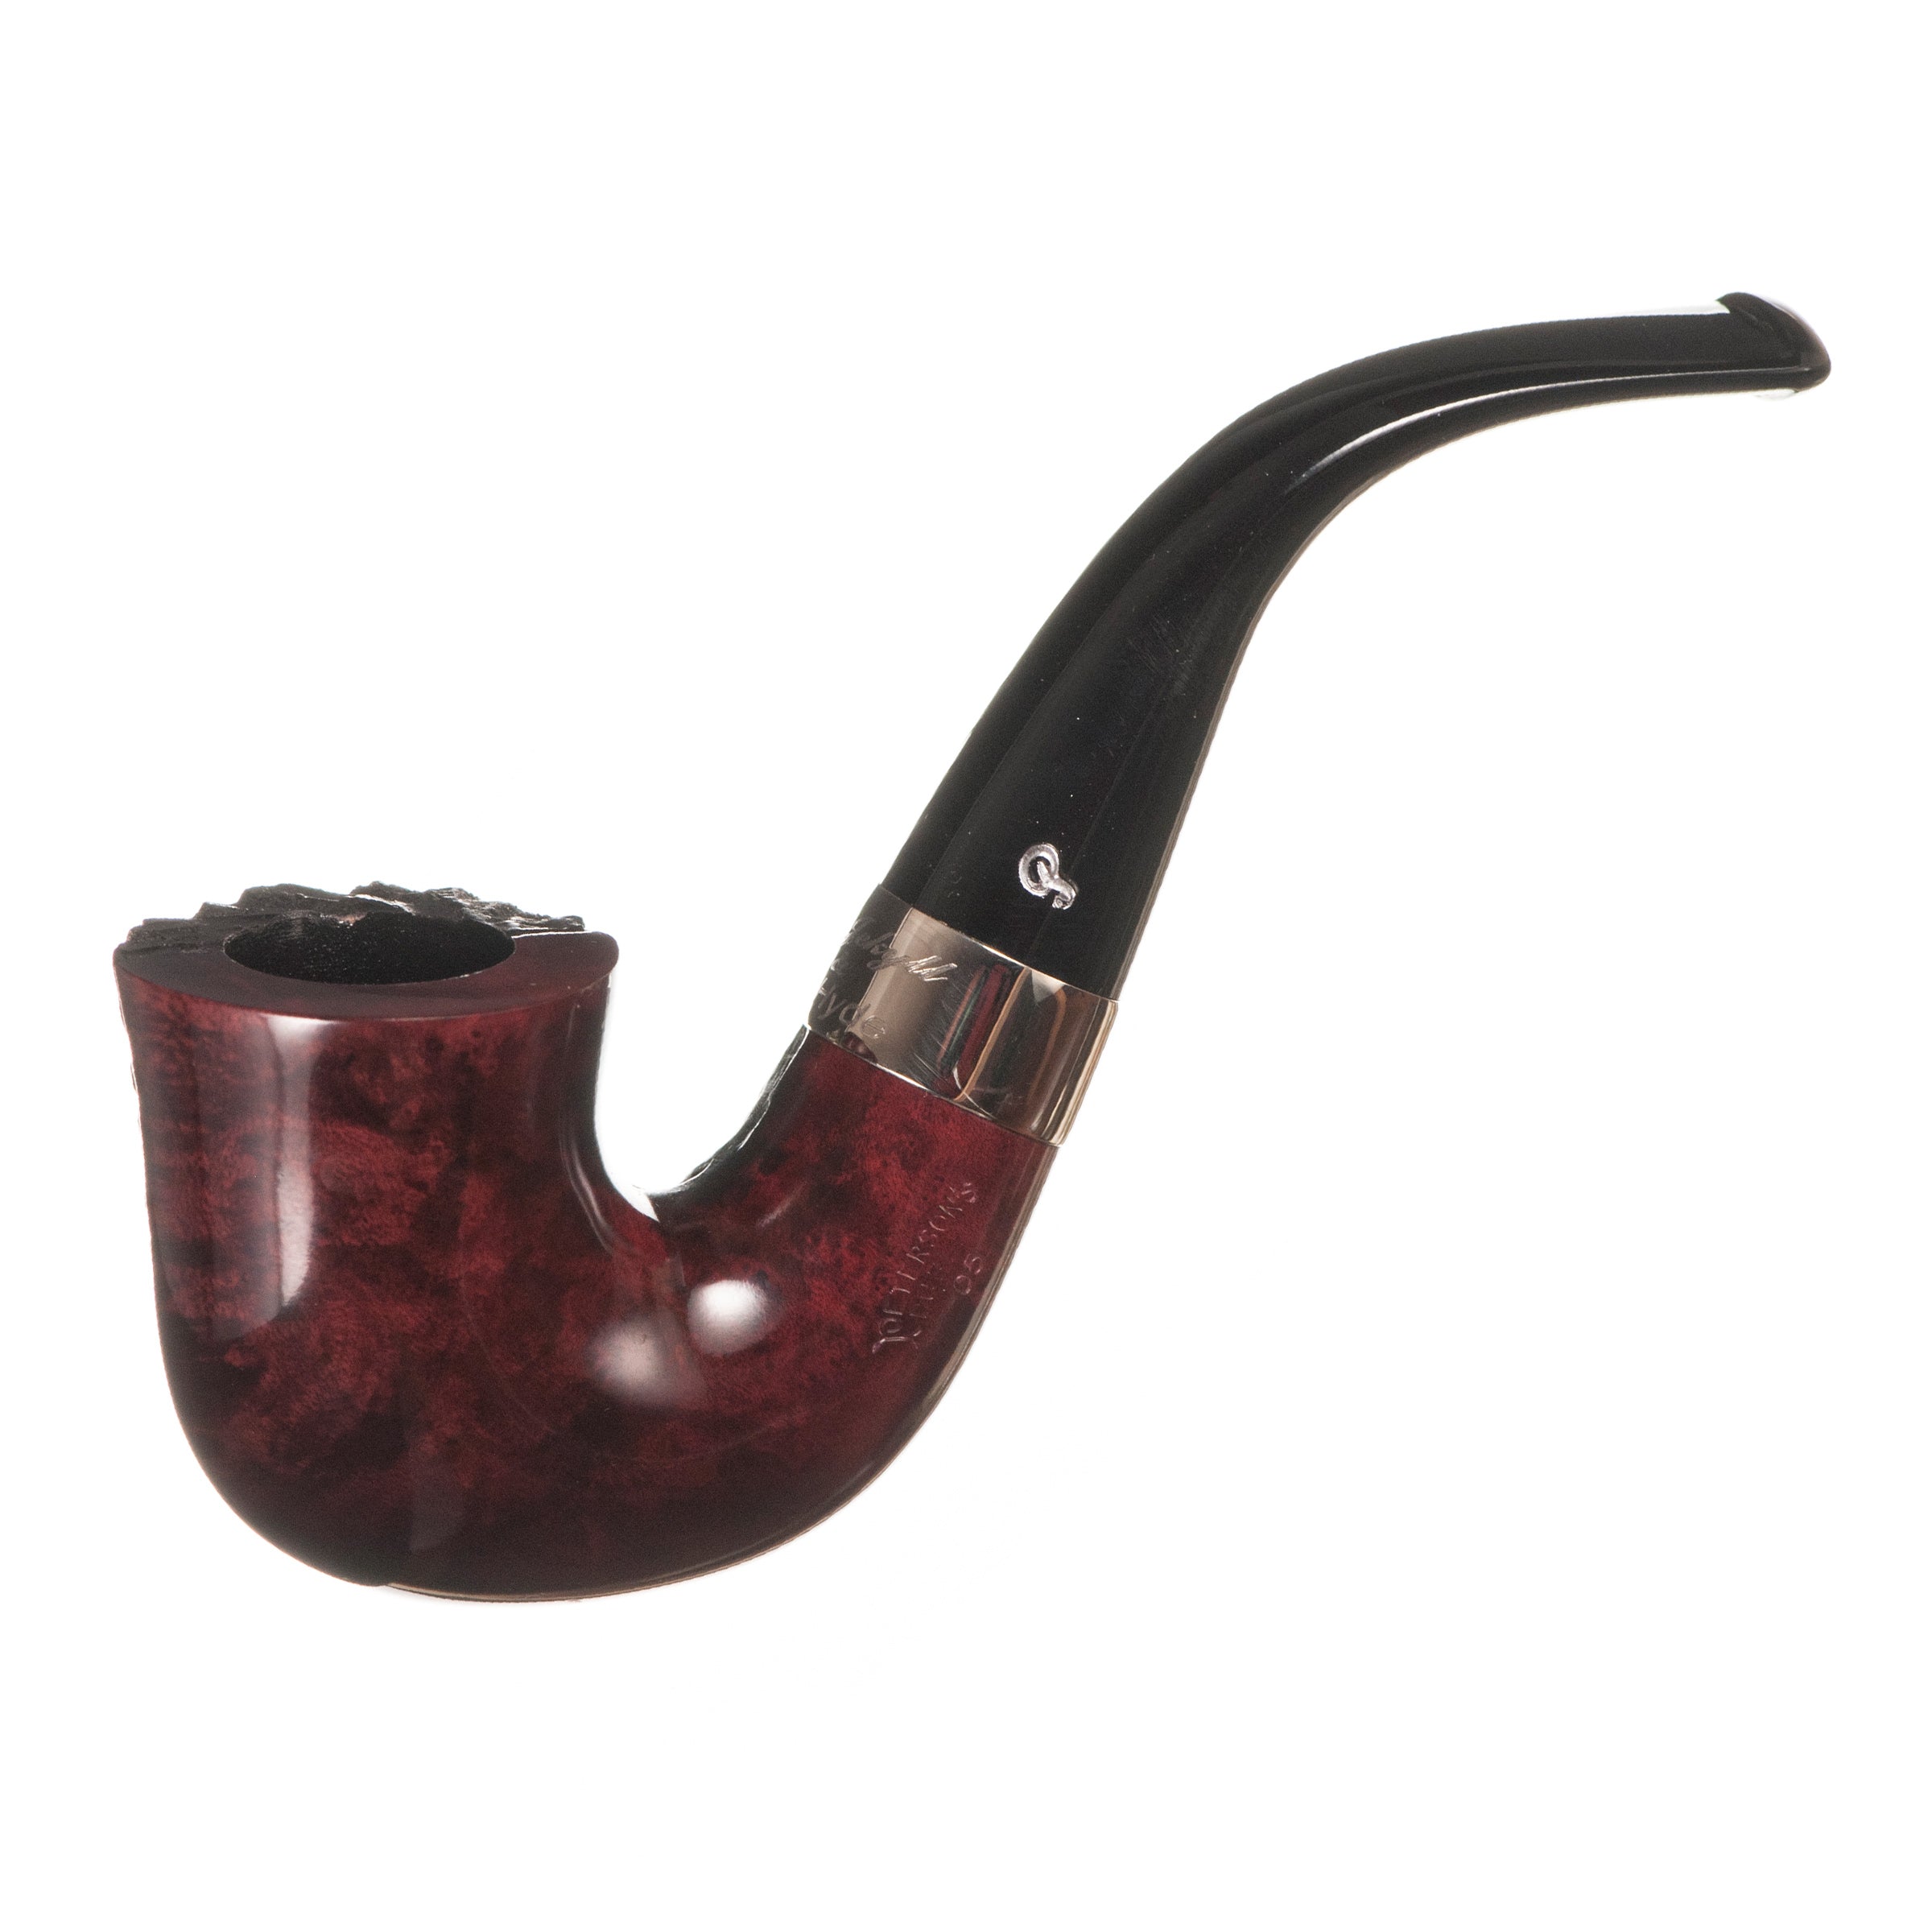 Peterson Jekyll & Hyde 05 Smooth/Rustic Pipe